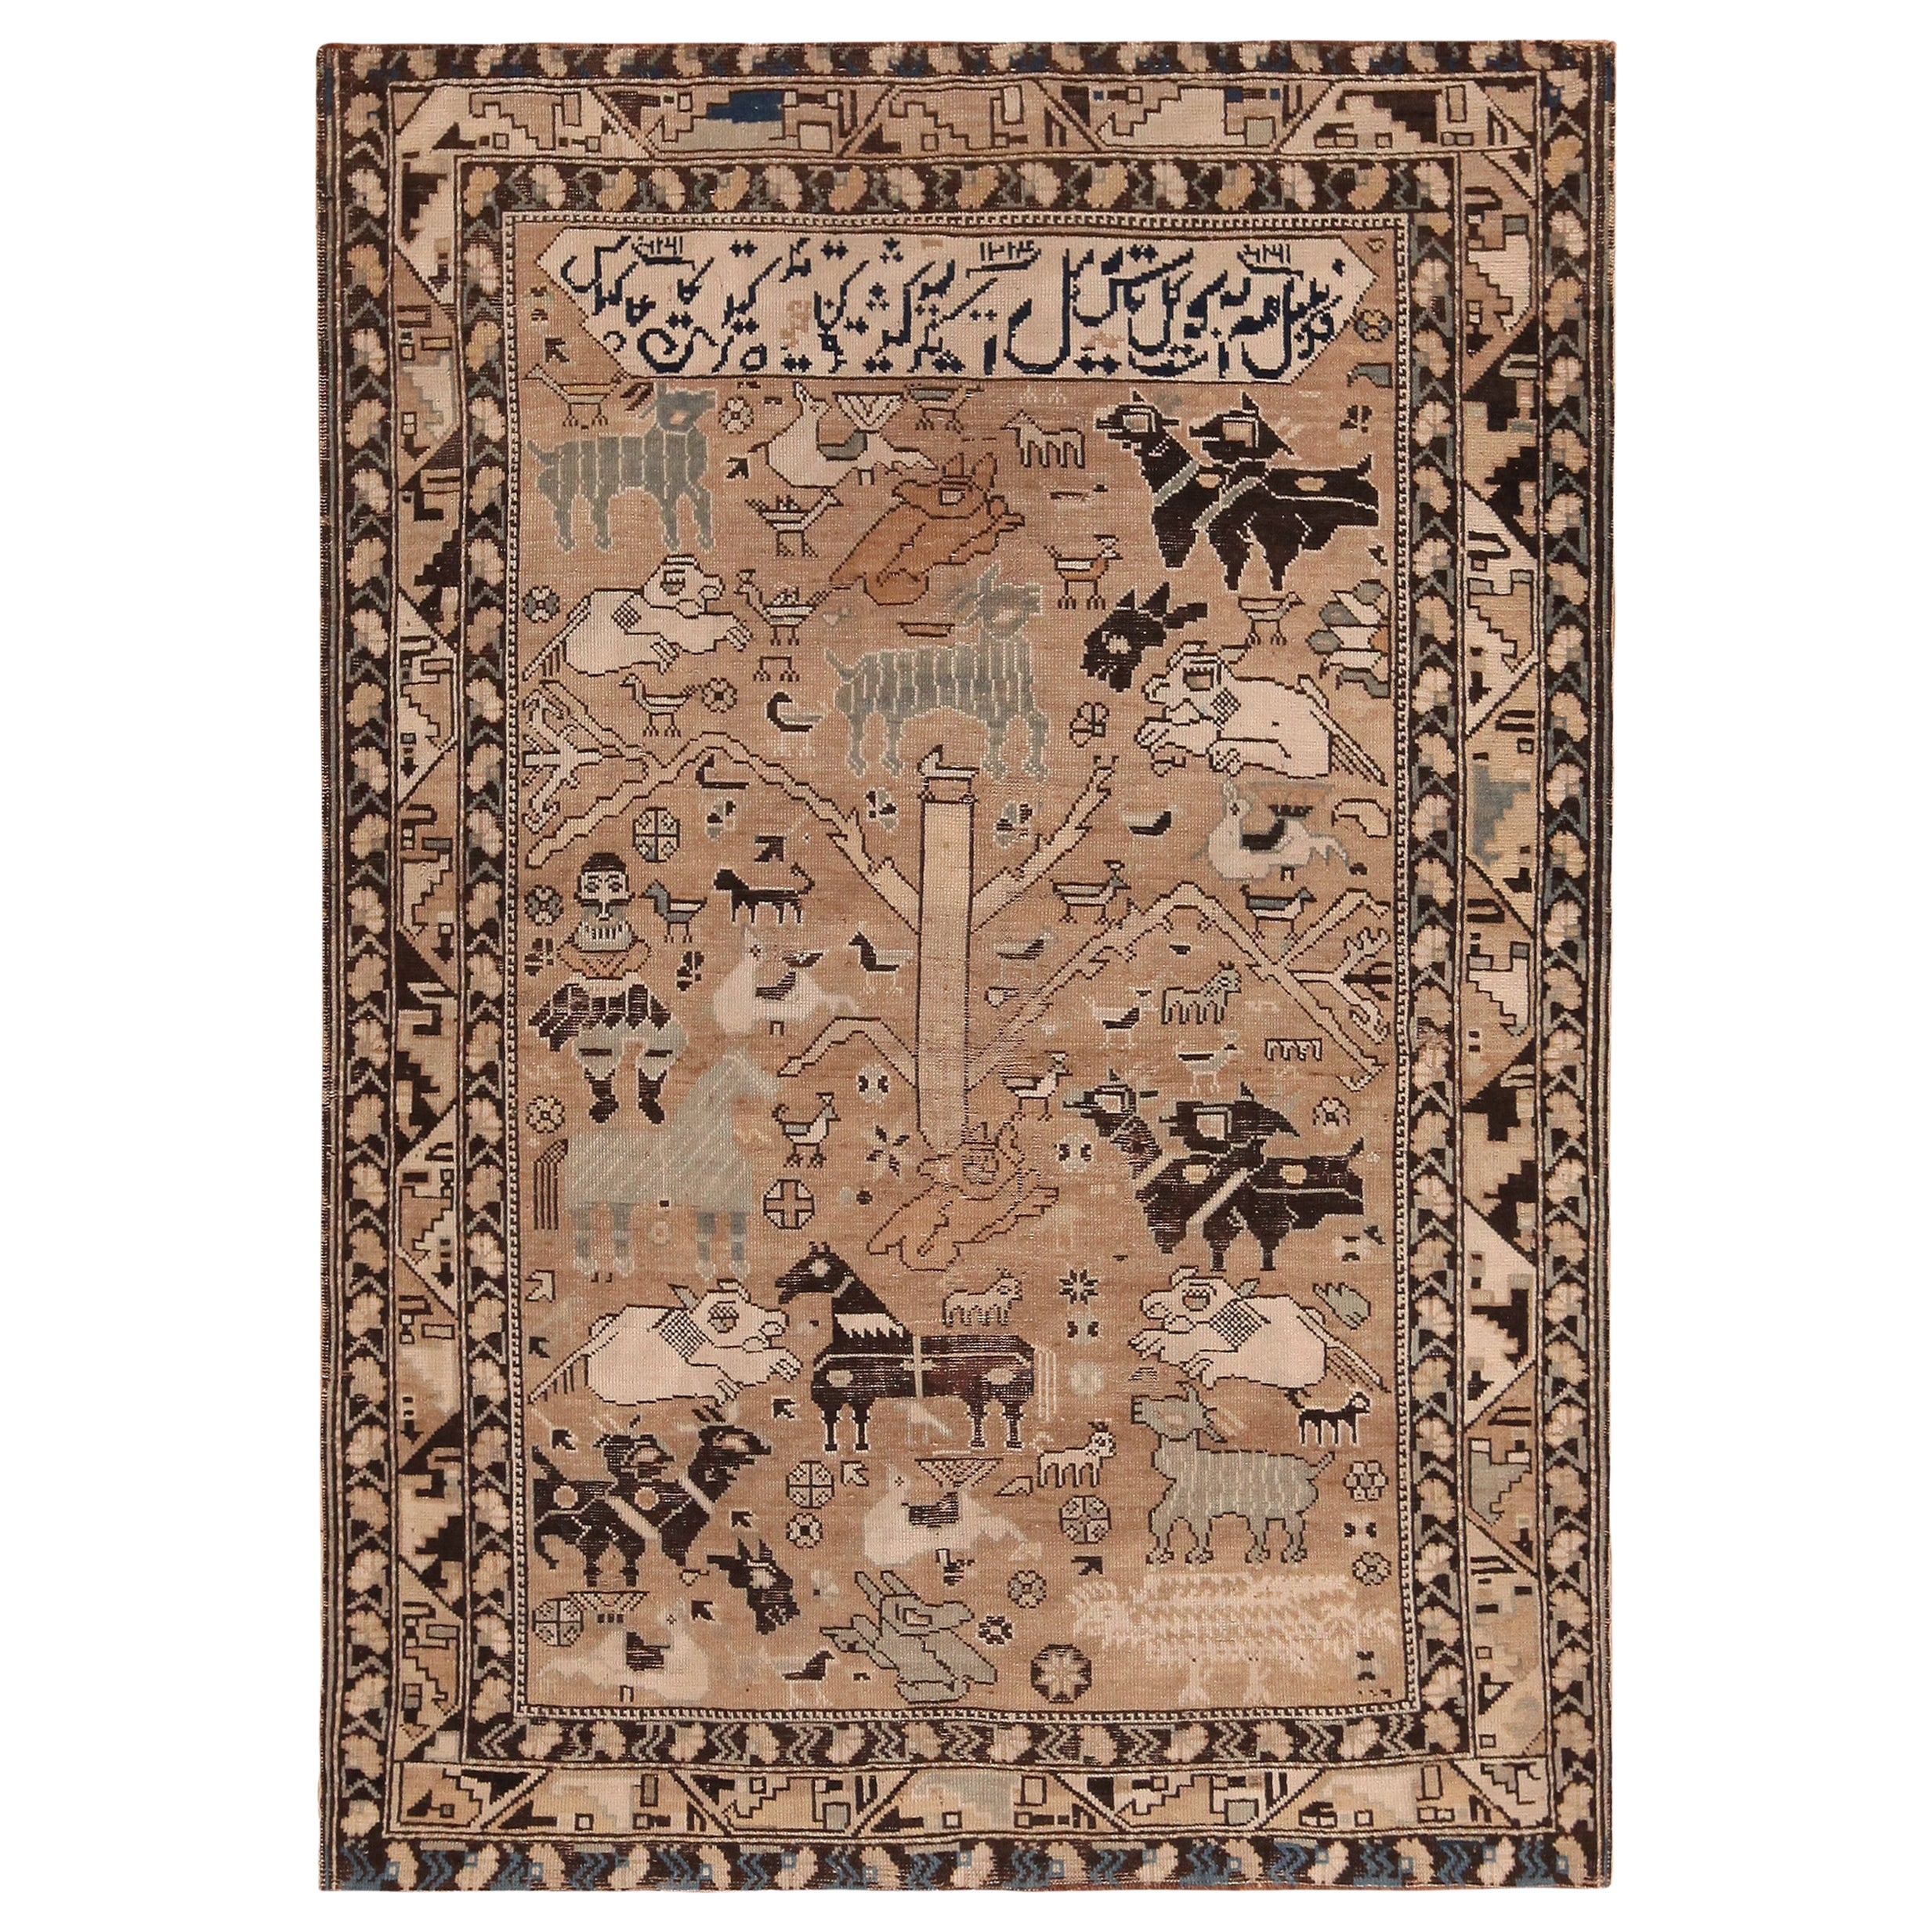 Collectible Antique Caucasian Shirvan Rug Dated 1214 (1800) 3'10" x 5'4" For Sale